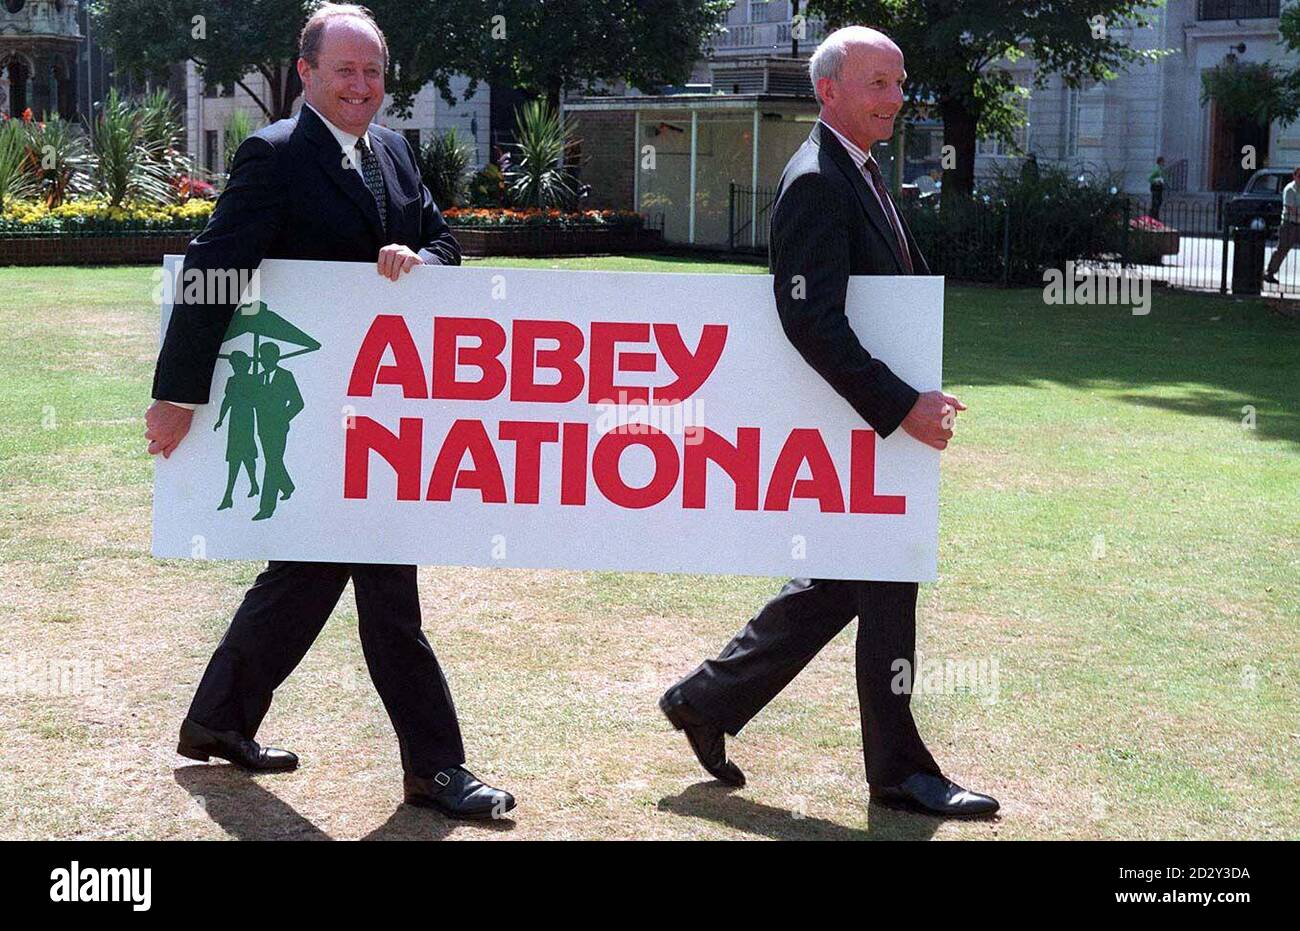 Lord Tugendhat (left) and Peter Birch, Chairman and Chief Executive respectively of Abbey National, in London today (Tuesday) after announcing a 23% increase in pre-tax profits. PA. SEE PA STORY CITY Abbey. Stock Photo